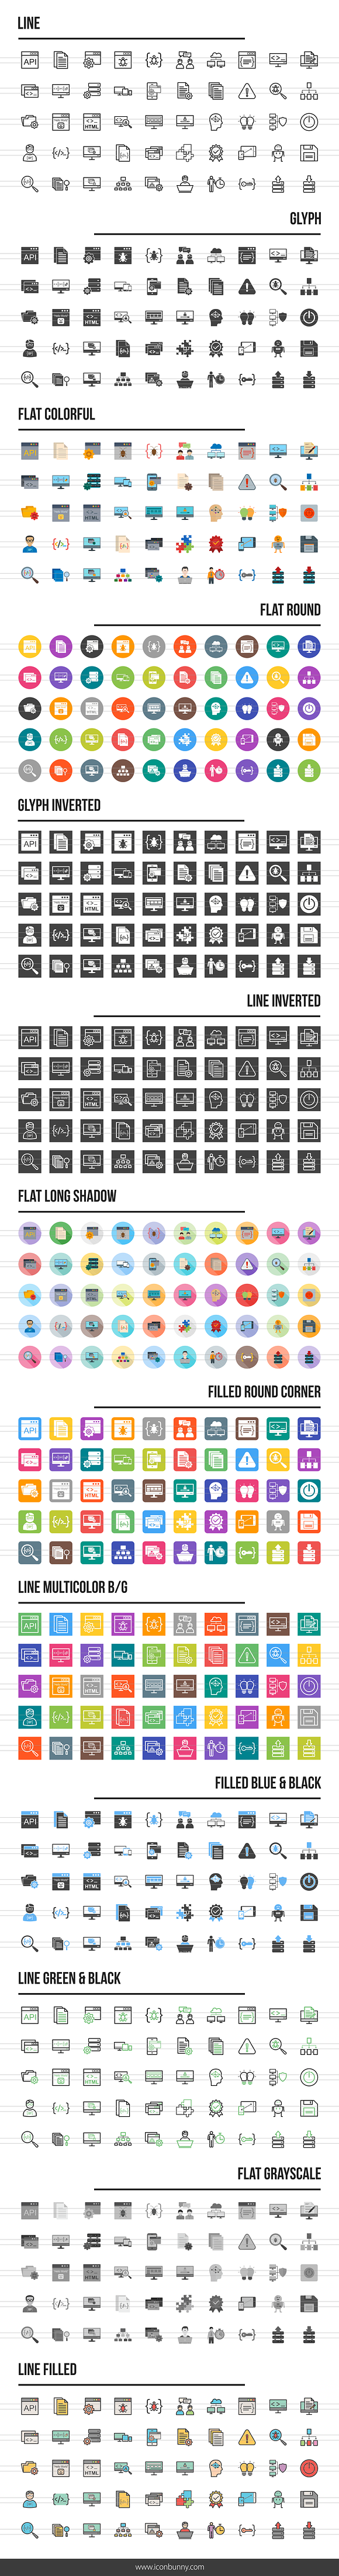 650 Software Development Icons in Graphics - product preview 1